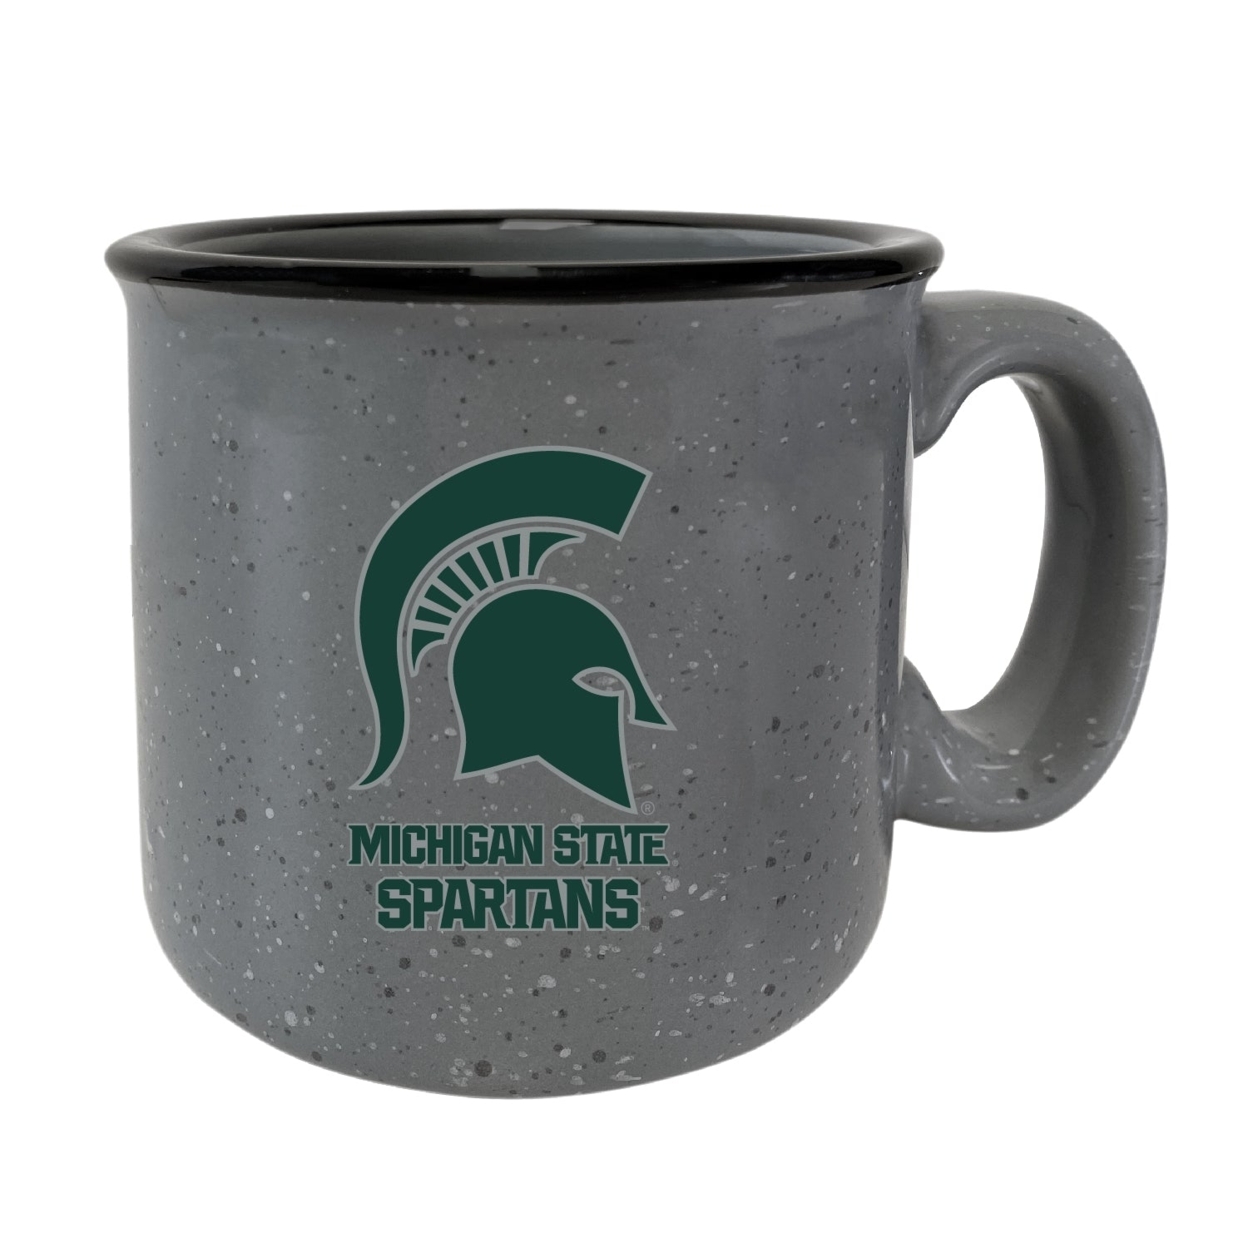 Michigan State Spartans Speckled Ceramic Camper Coffee Mug - Choose Your Color - Gray